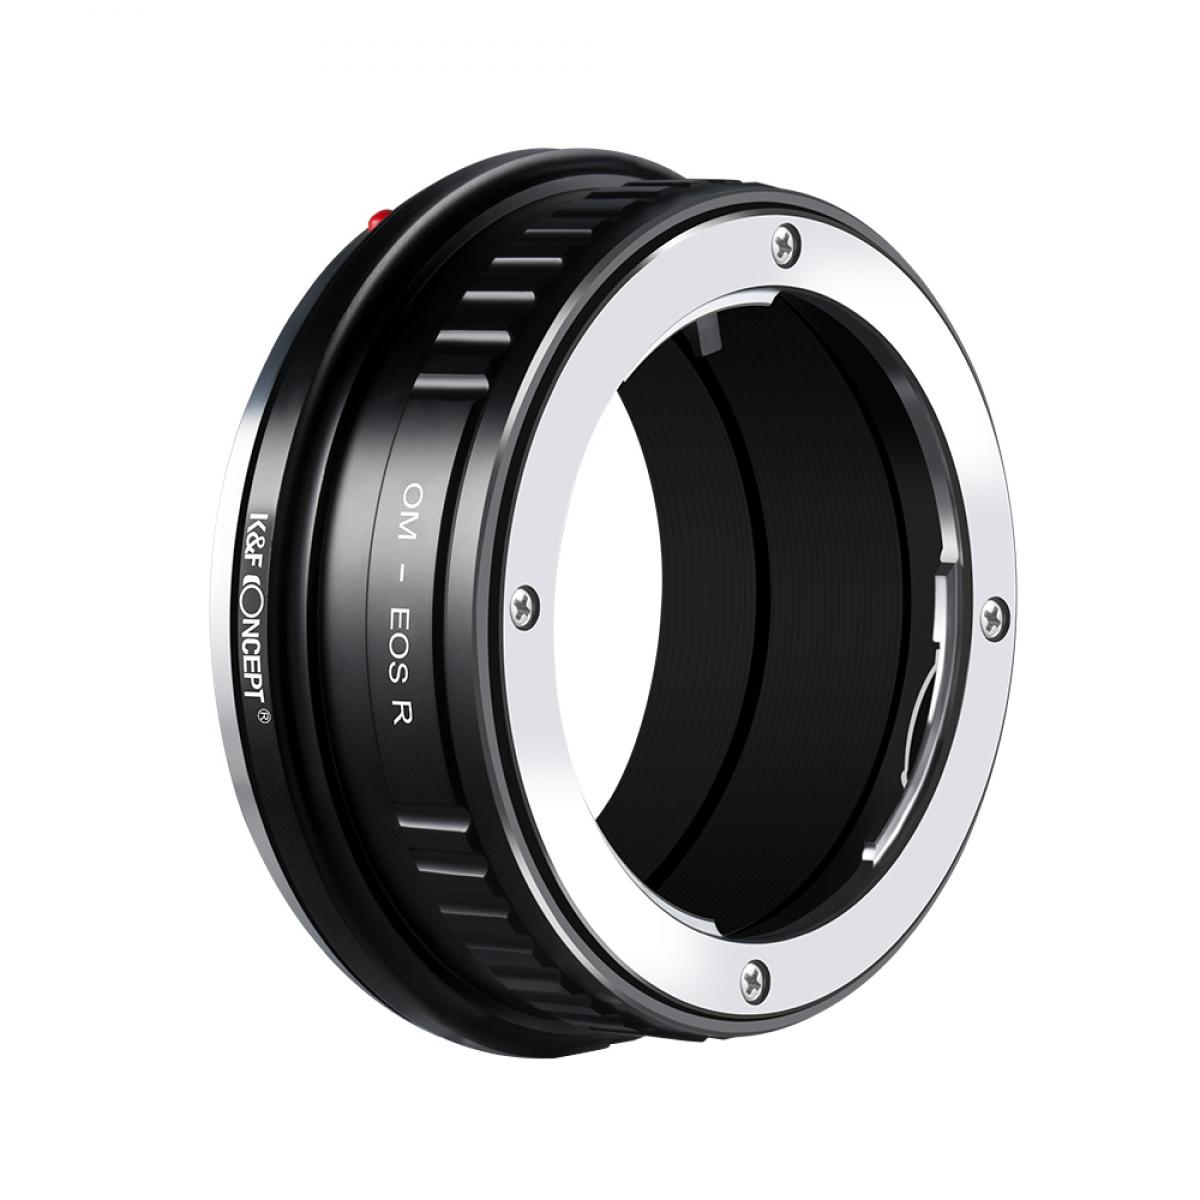 OM-EOS Mount Adapter Ring for Olympus OM Lens to Canon EF 450D 550D 50D 7D 